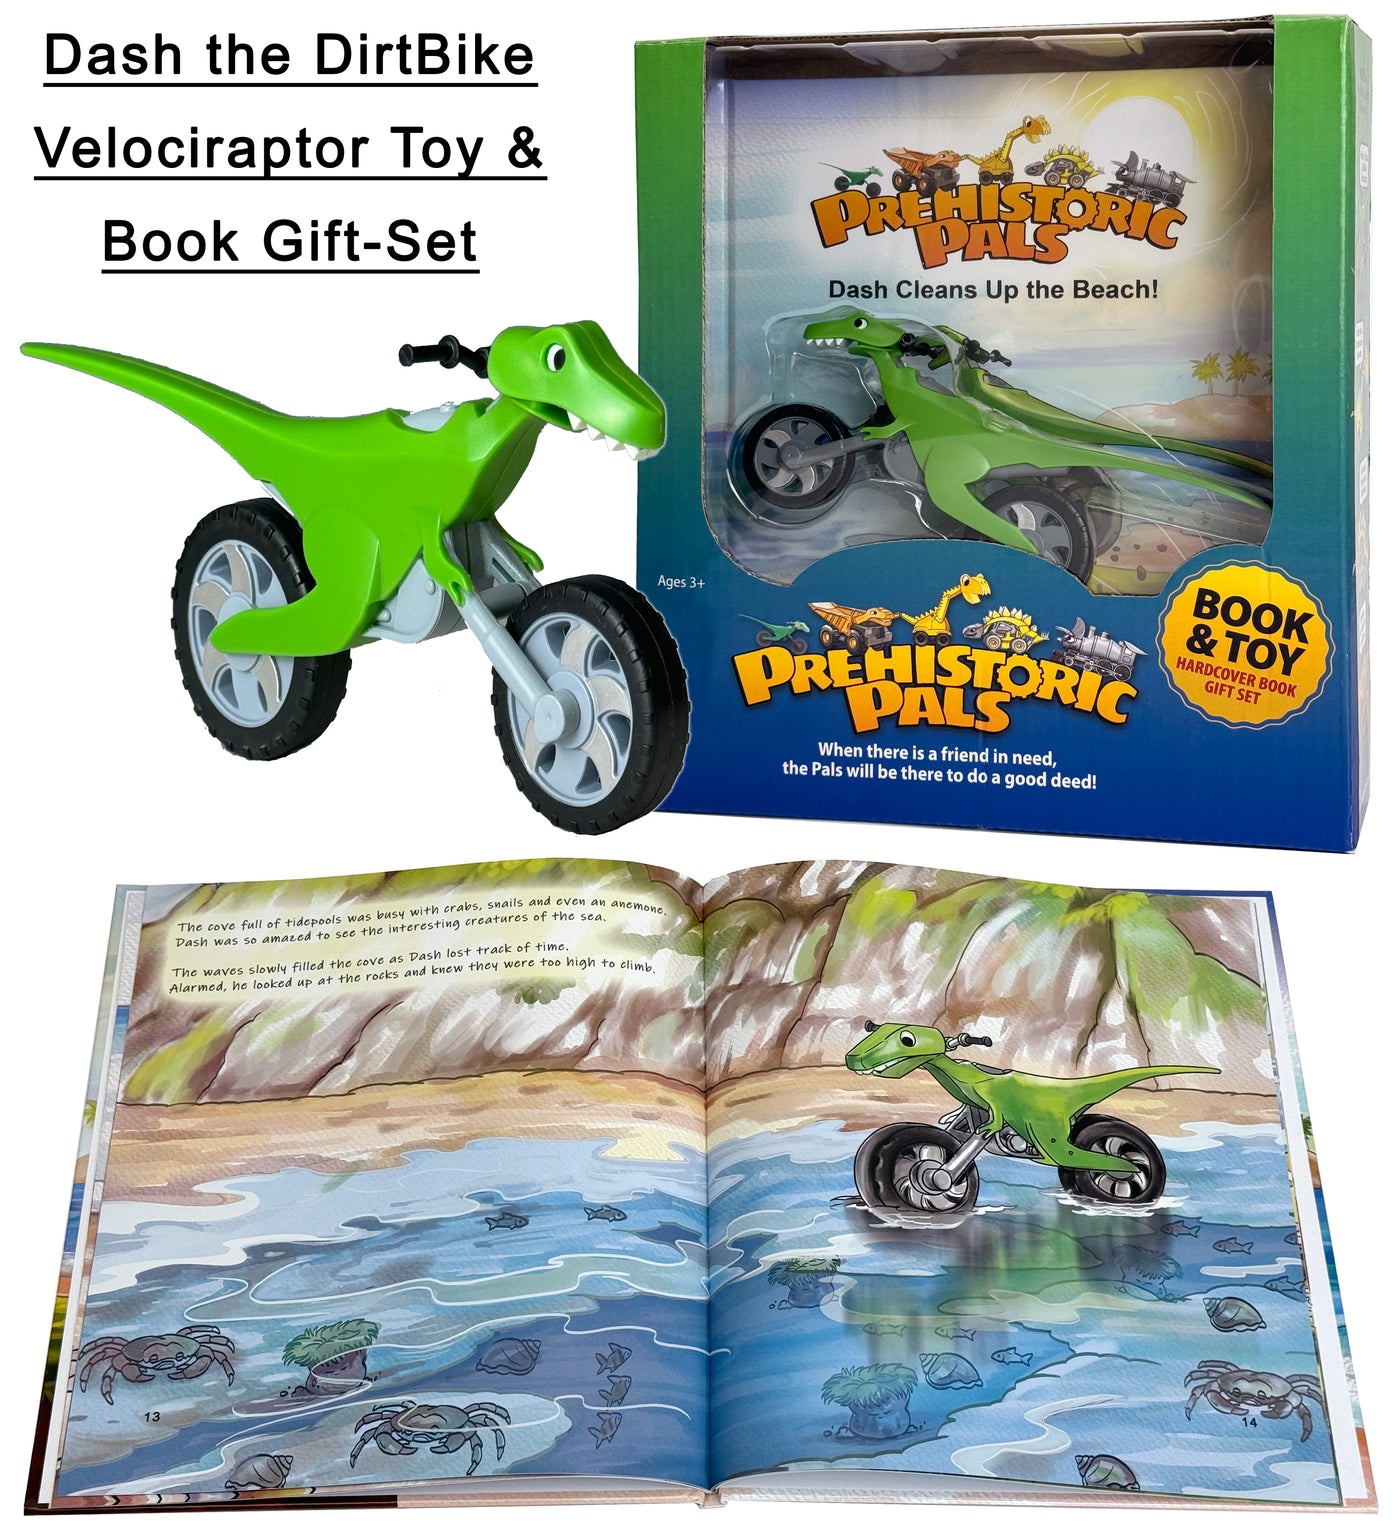 Dinosaur Book and Toy Gift Set | Dash Cleans Up the Beach